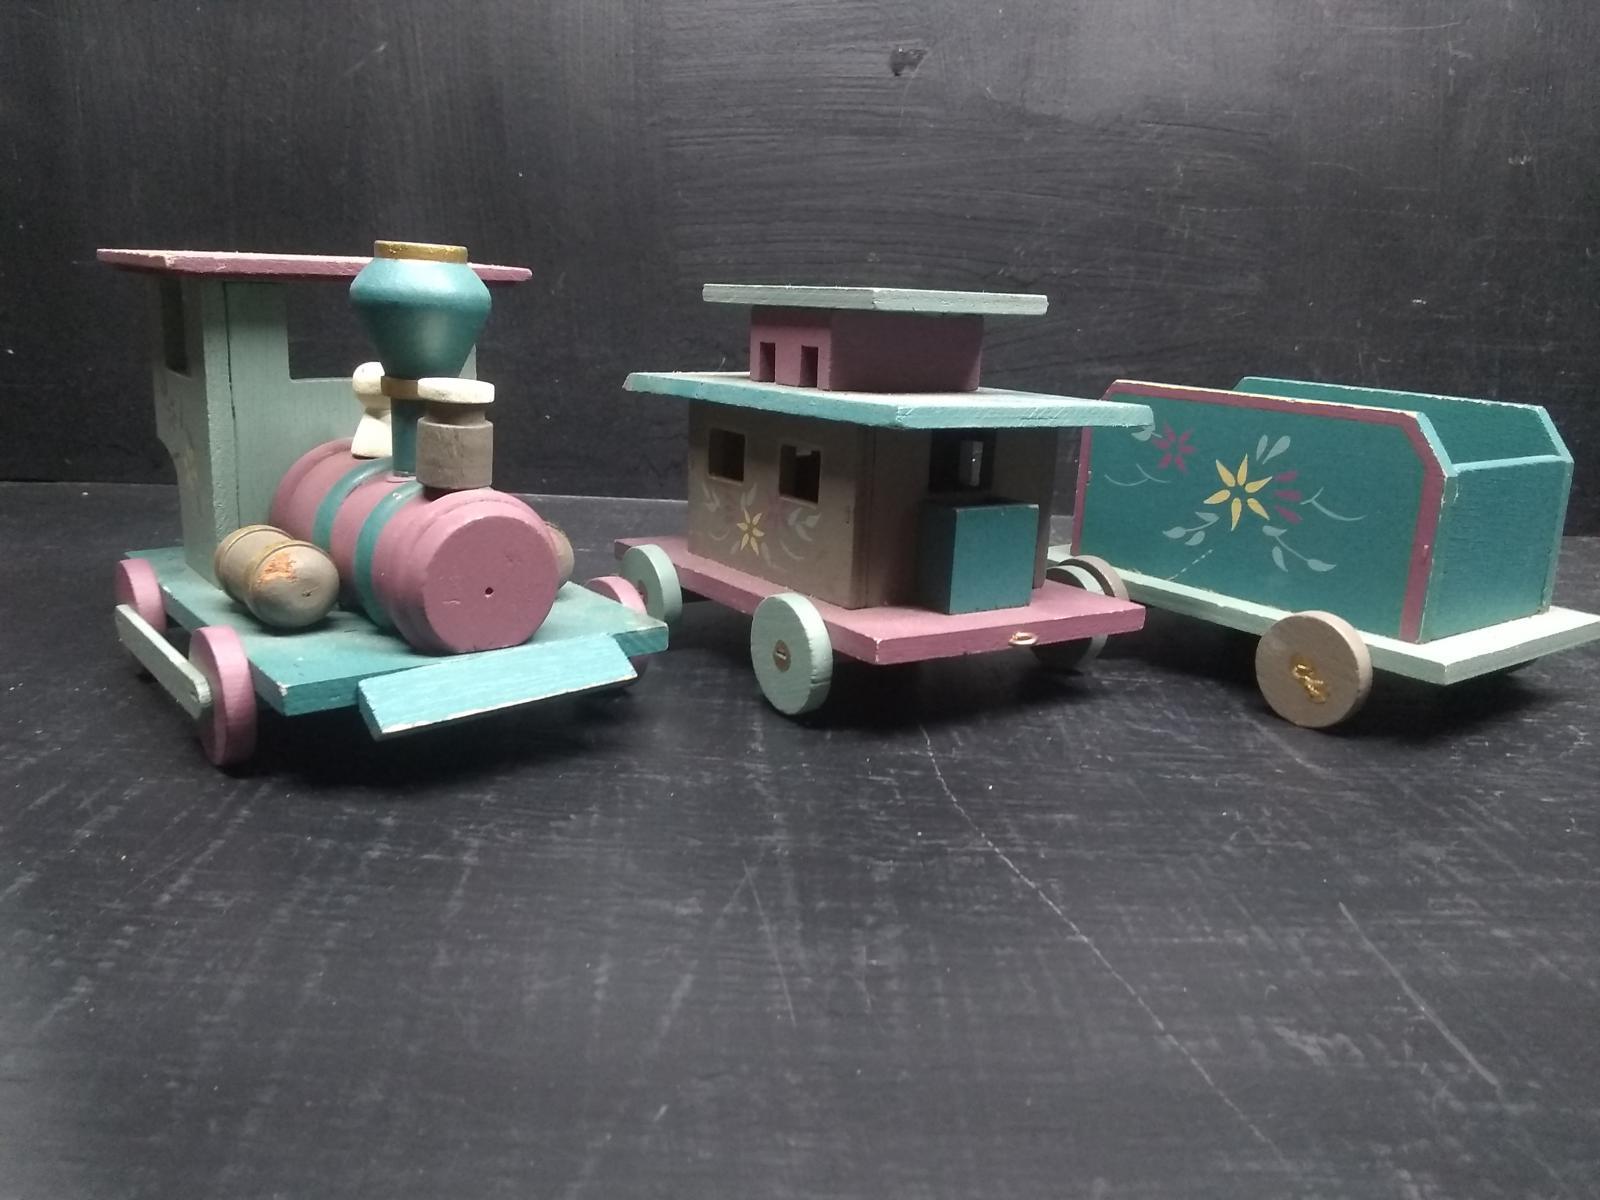 3 pc Wooden Hand painted Decorative Train